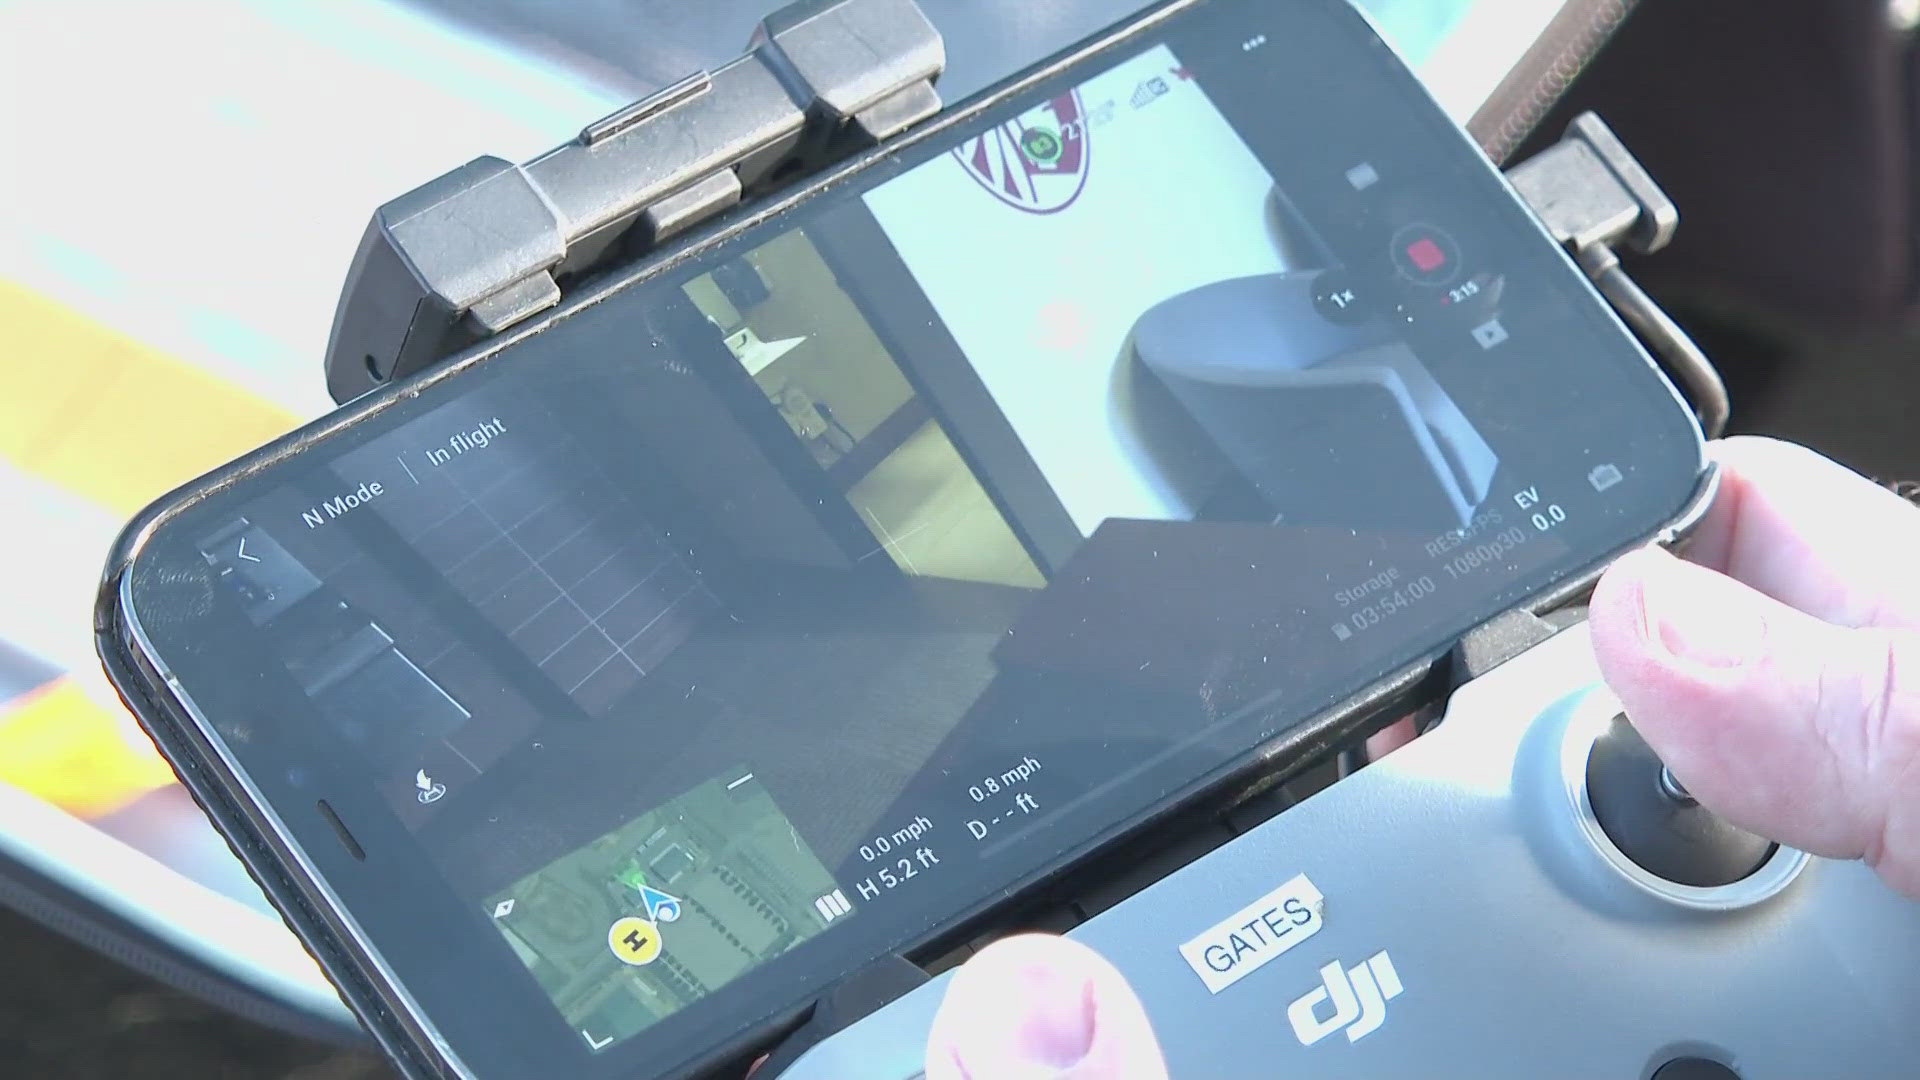 Deputies can now use drones indoors to search for suspects or hostages on potential SWAT calls.